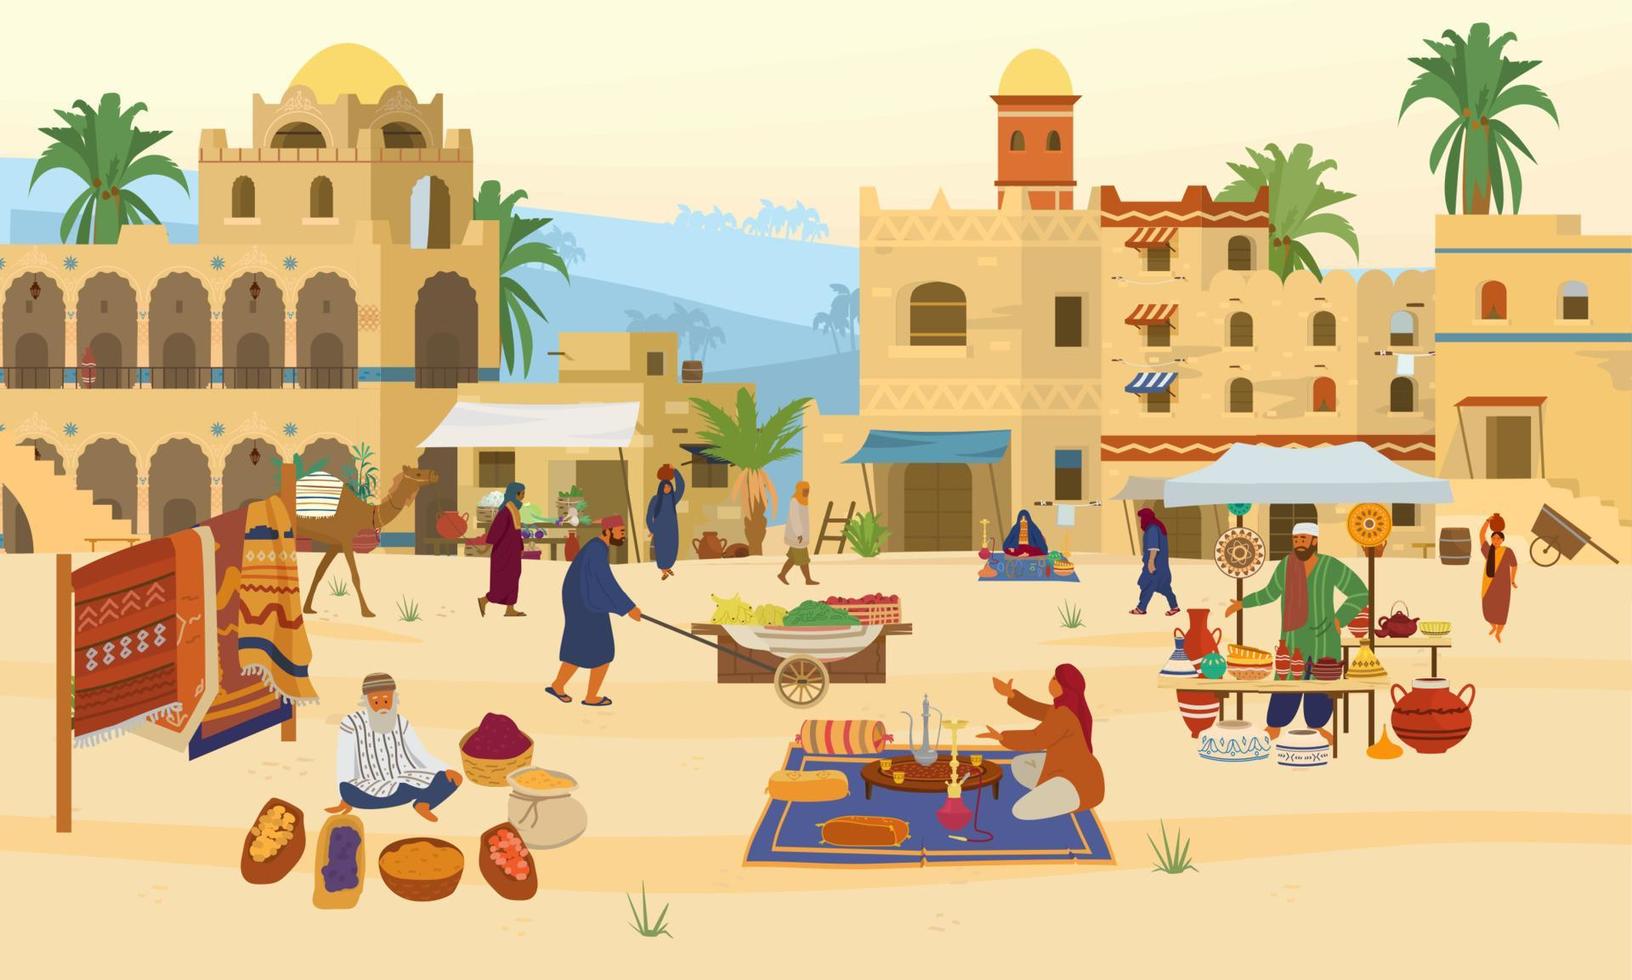 Vector illustration of Middle Eastern scene. Arabic desert landscape with traditional mud brick houses and people.  Carpets, ceramics, fruits, spices. Islamic Architecture.